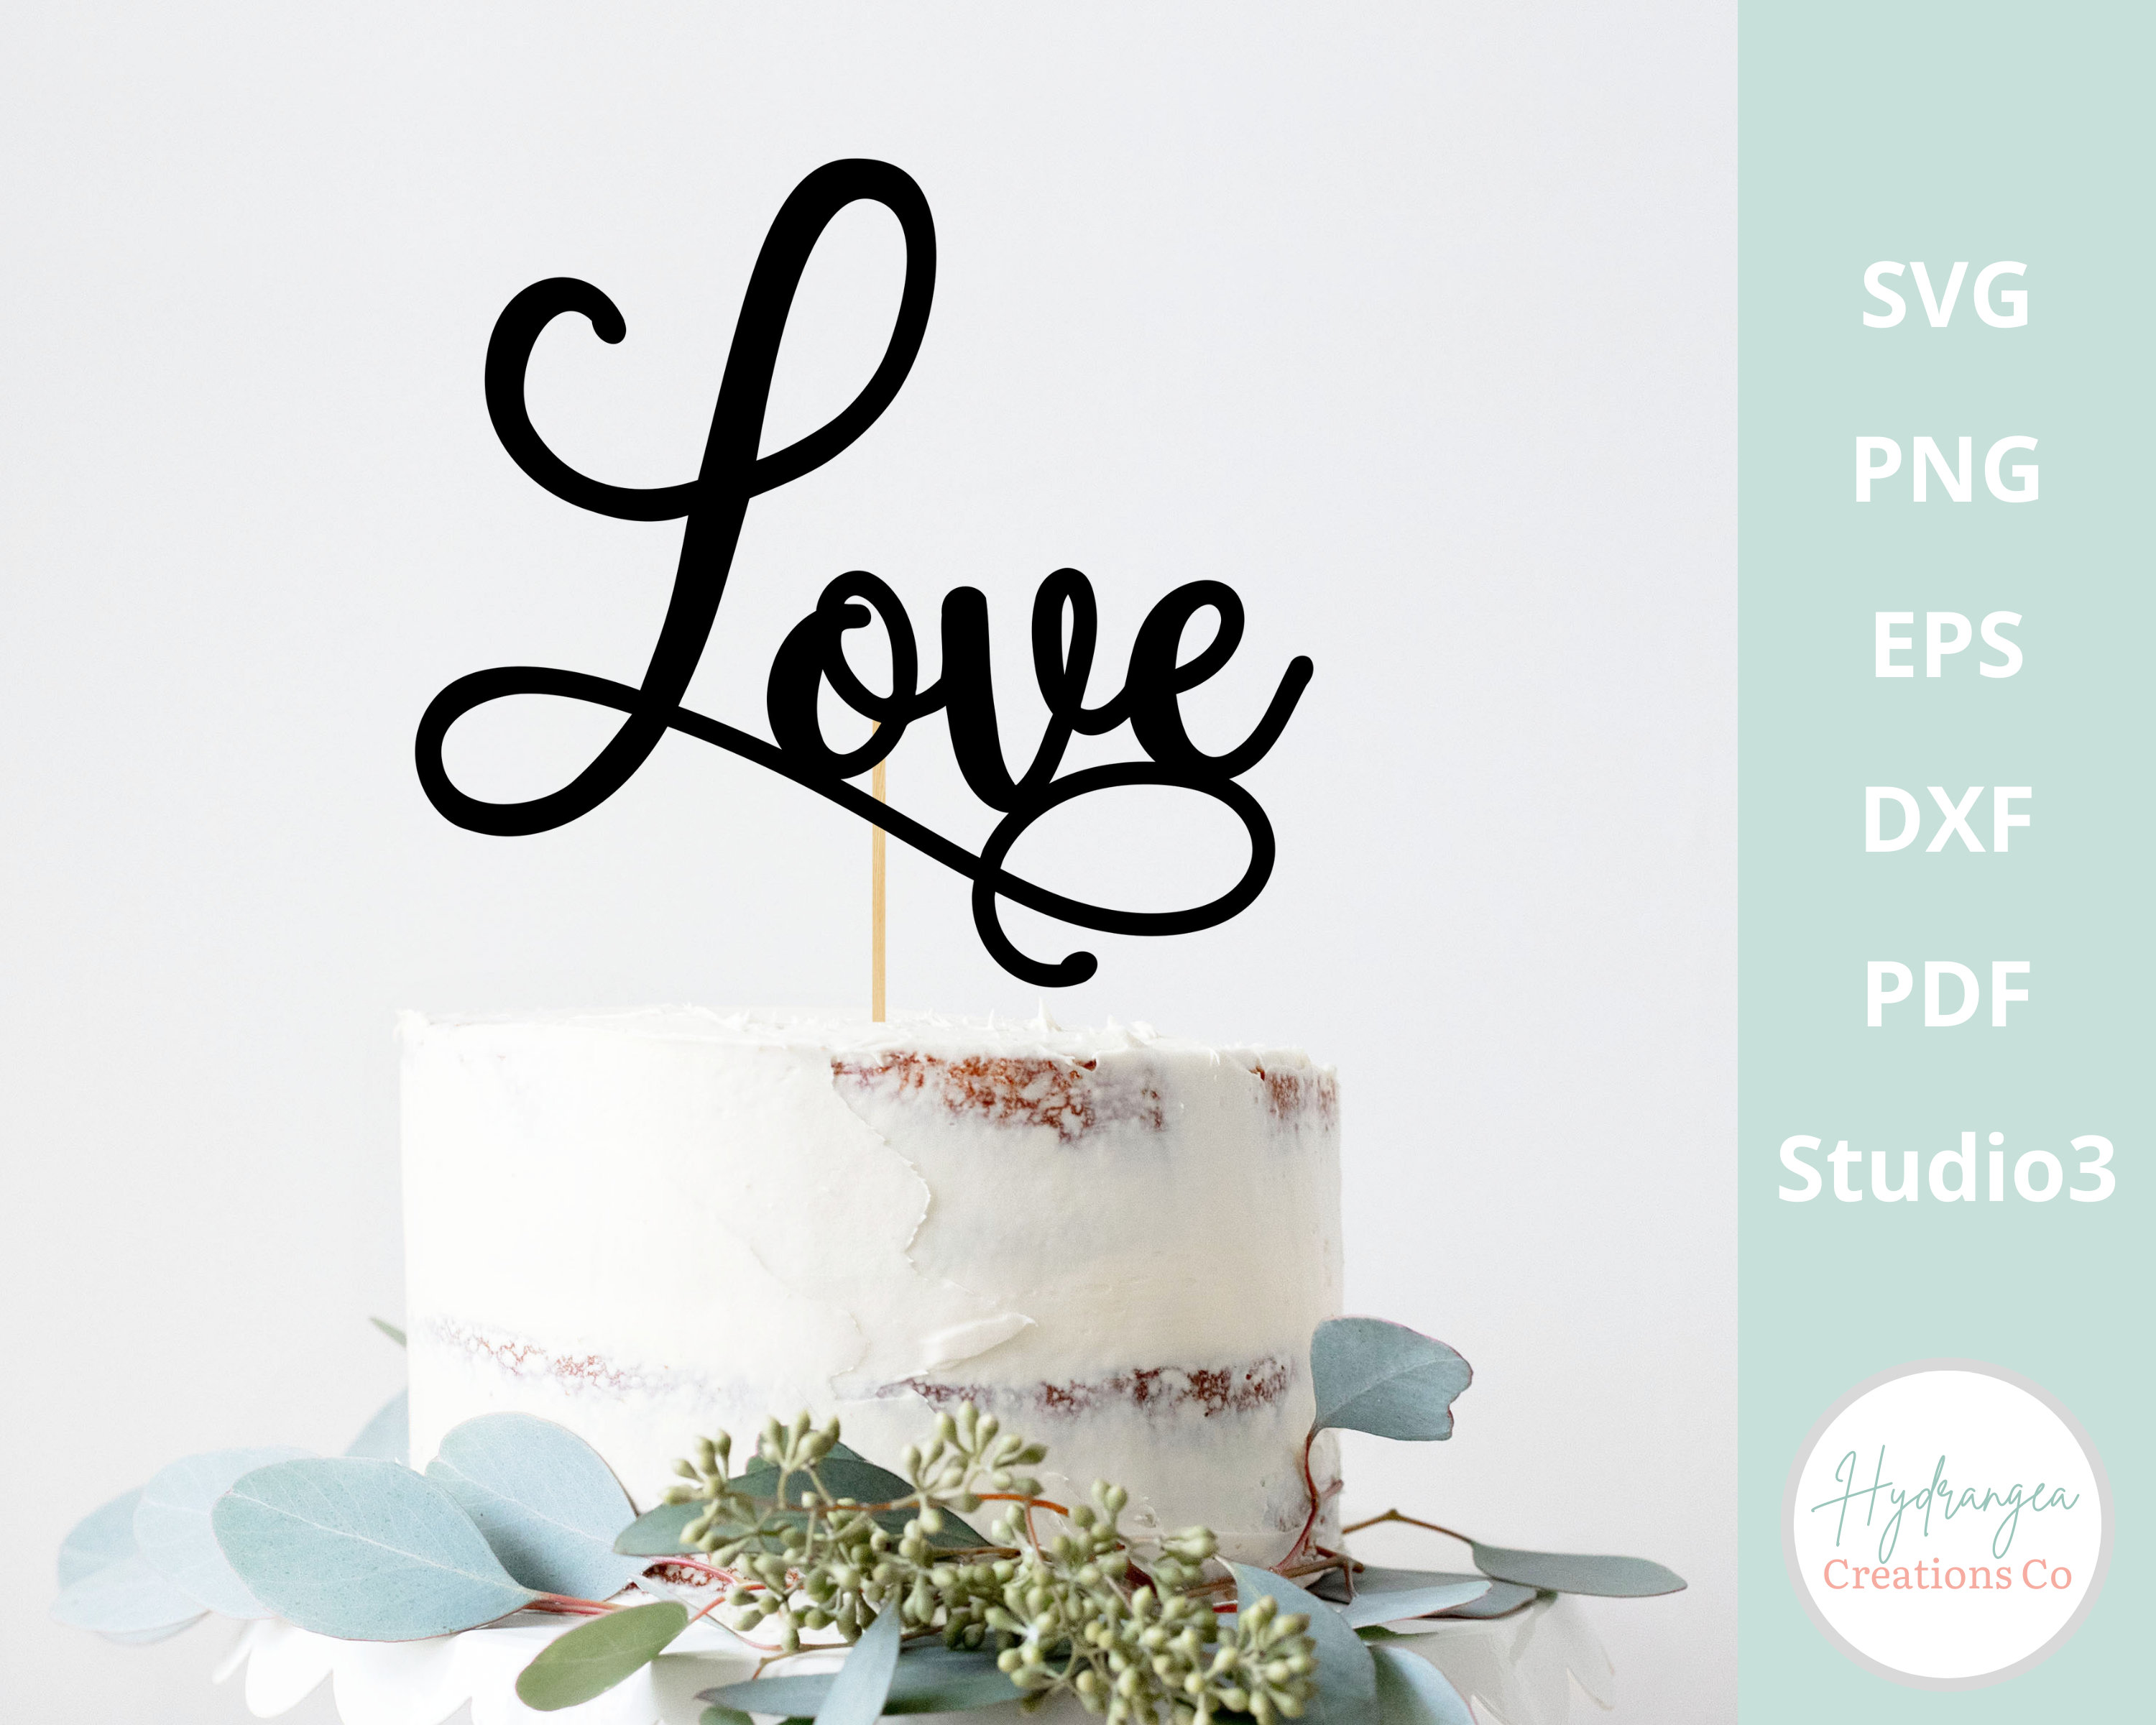 Love Letter Edible Cake Wrap or Paper Airplane Cake Topper 